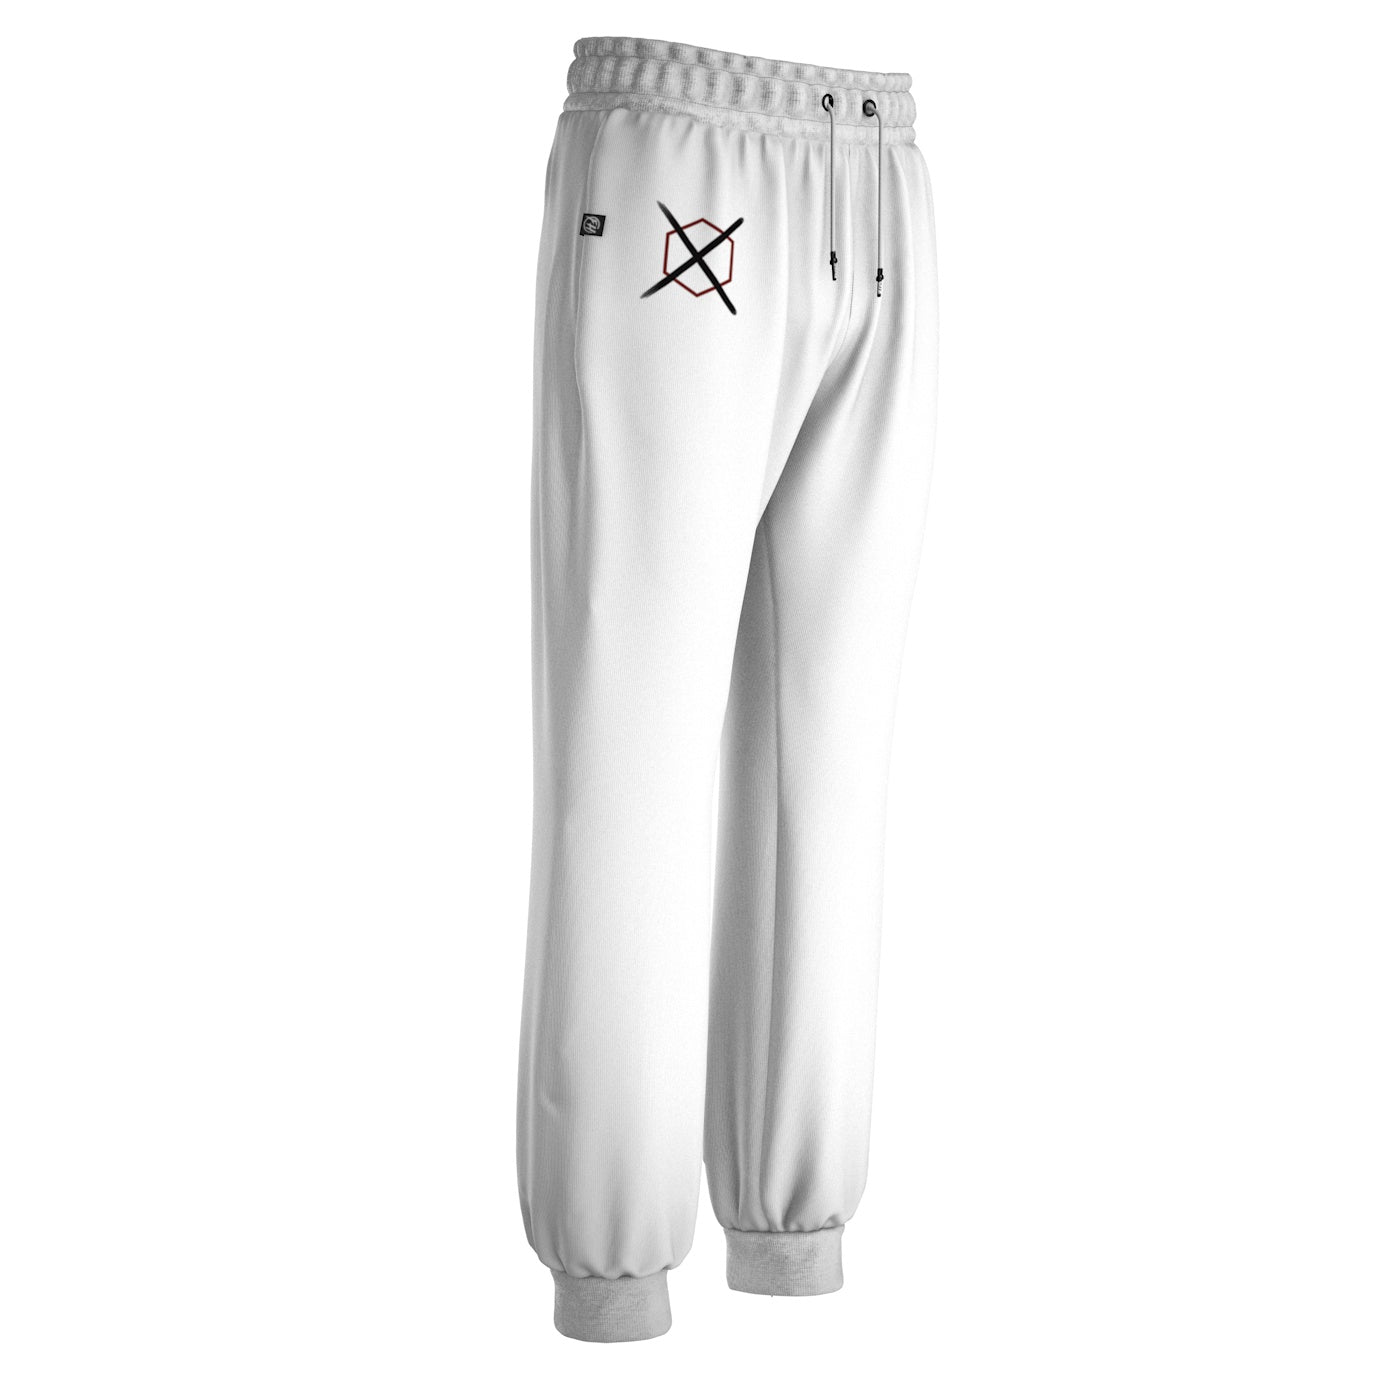 What is the difference between jogger pants and track pants? - Quora